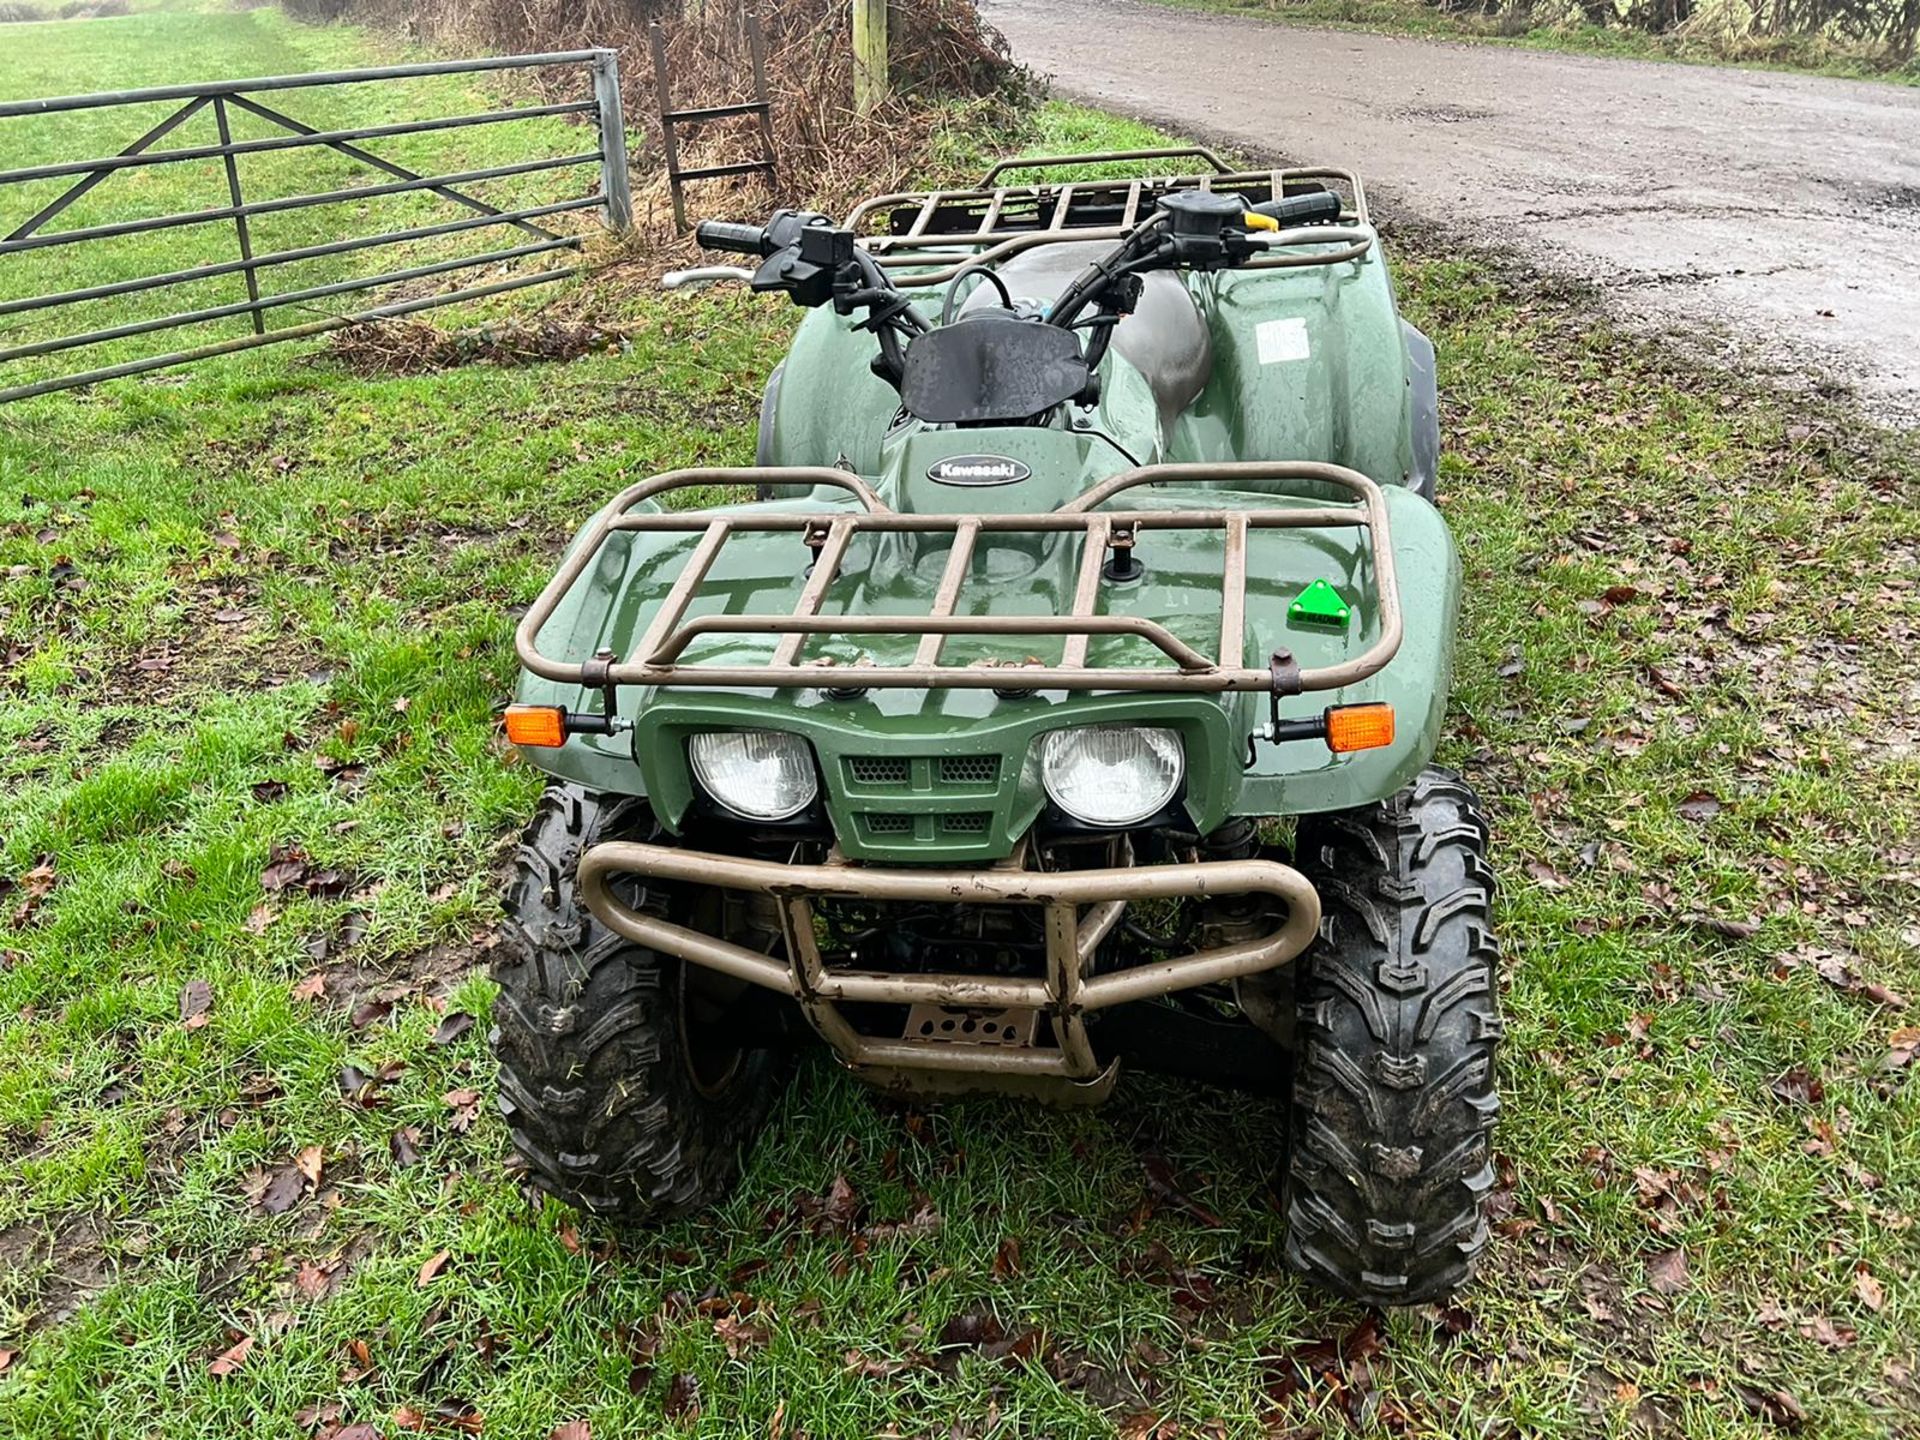 KAWASAKI KVF360 4WD FARM QUAD BIKE, RUNS AND DRIVES WELL, SHOWING A LOW 3438 HOURS PLUS VAT* - Image 2 of 13